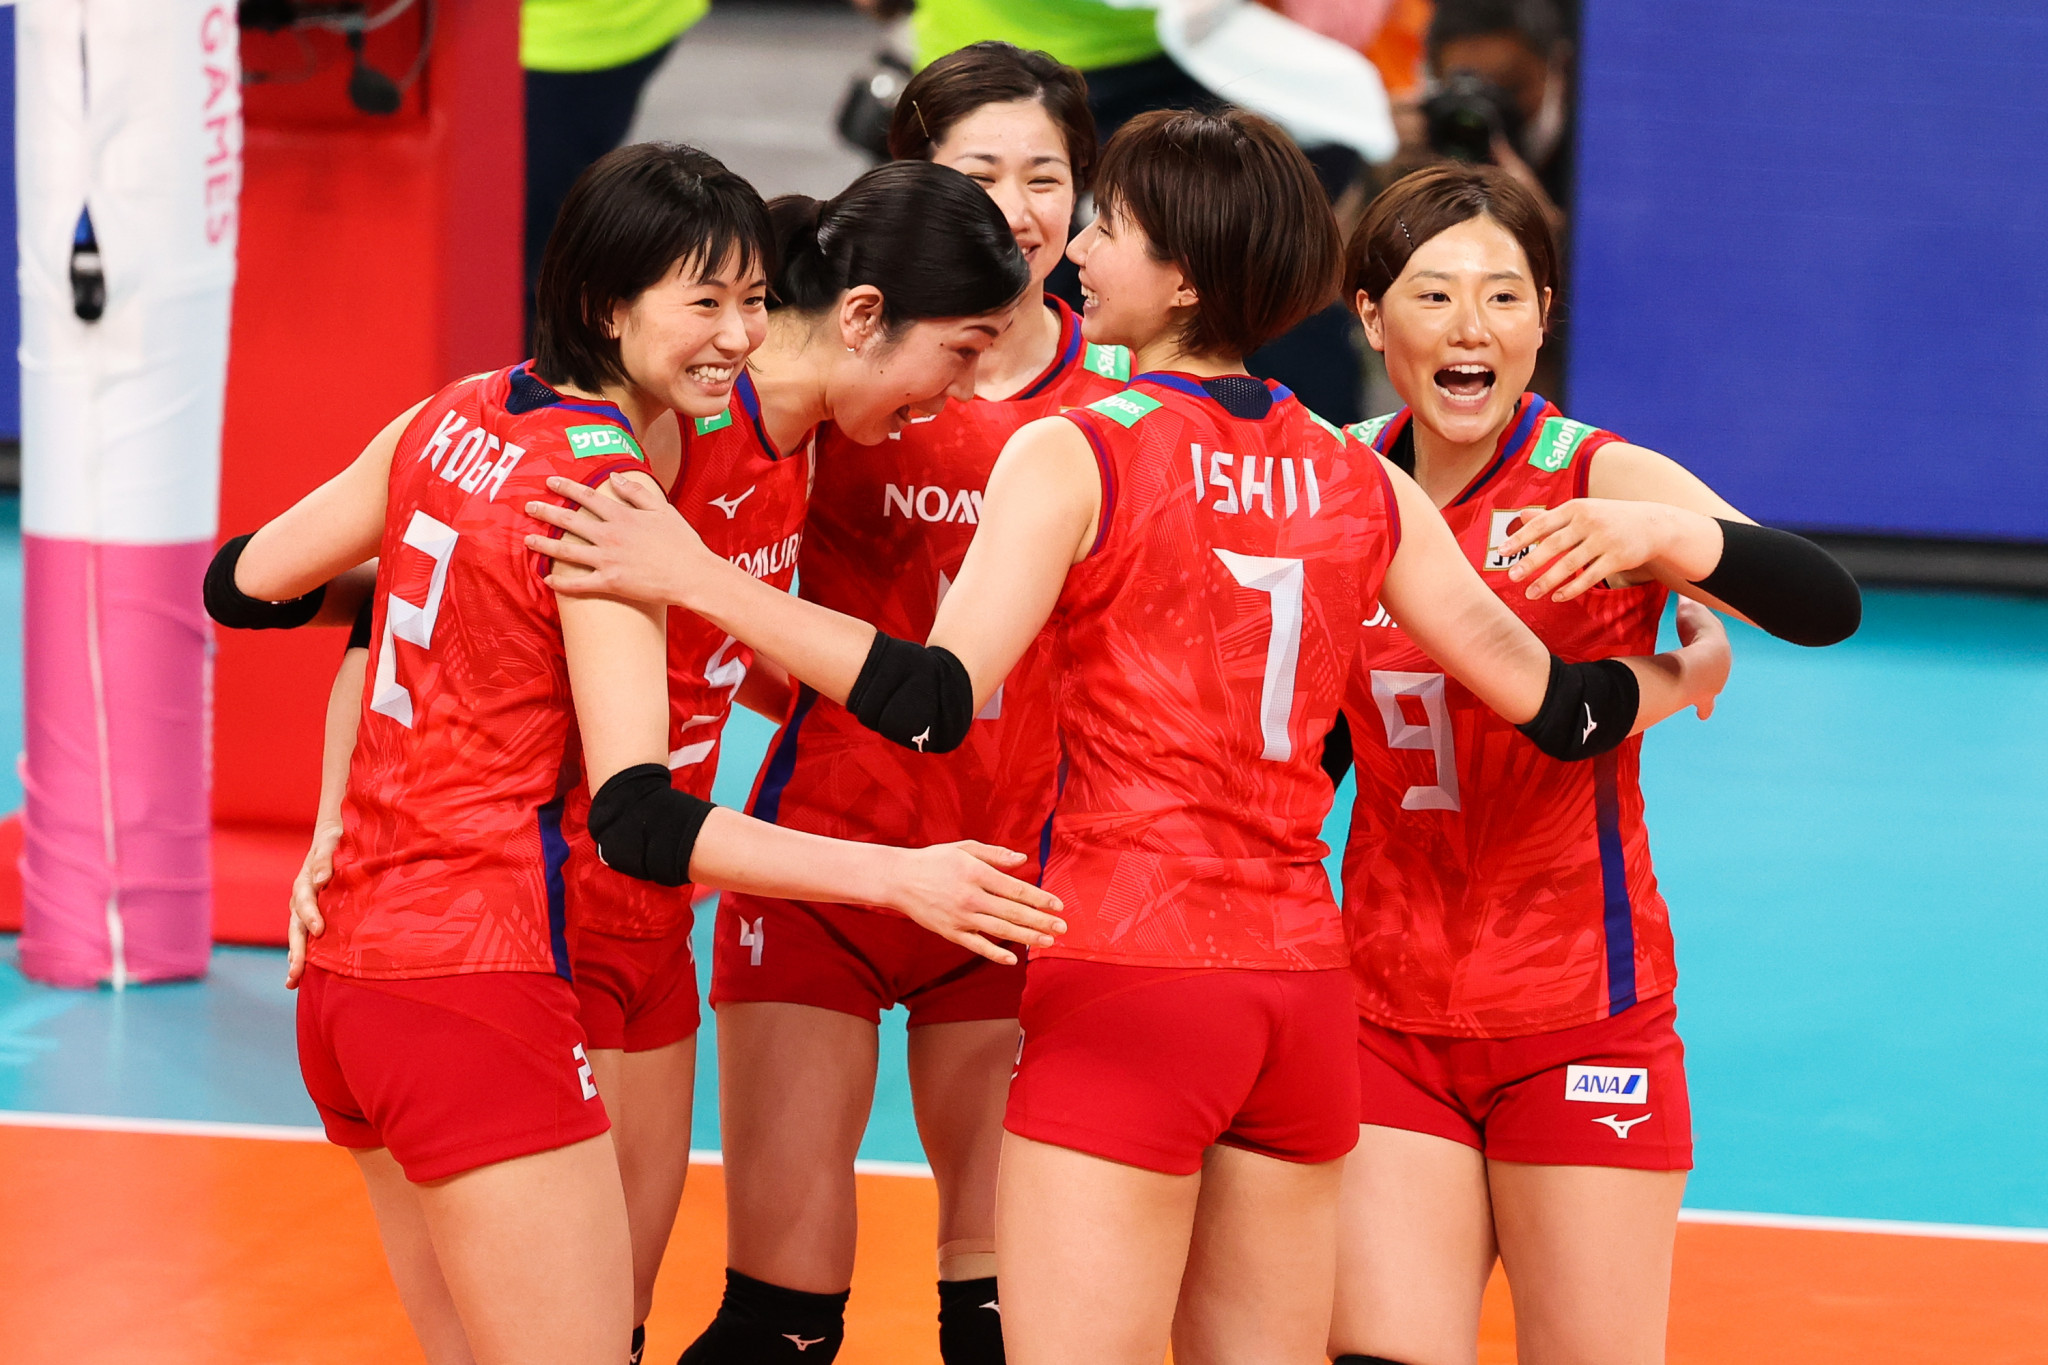 Japan upset Olympic silver medallists Brazil to reach Women's World Volleyball Championship Second Round